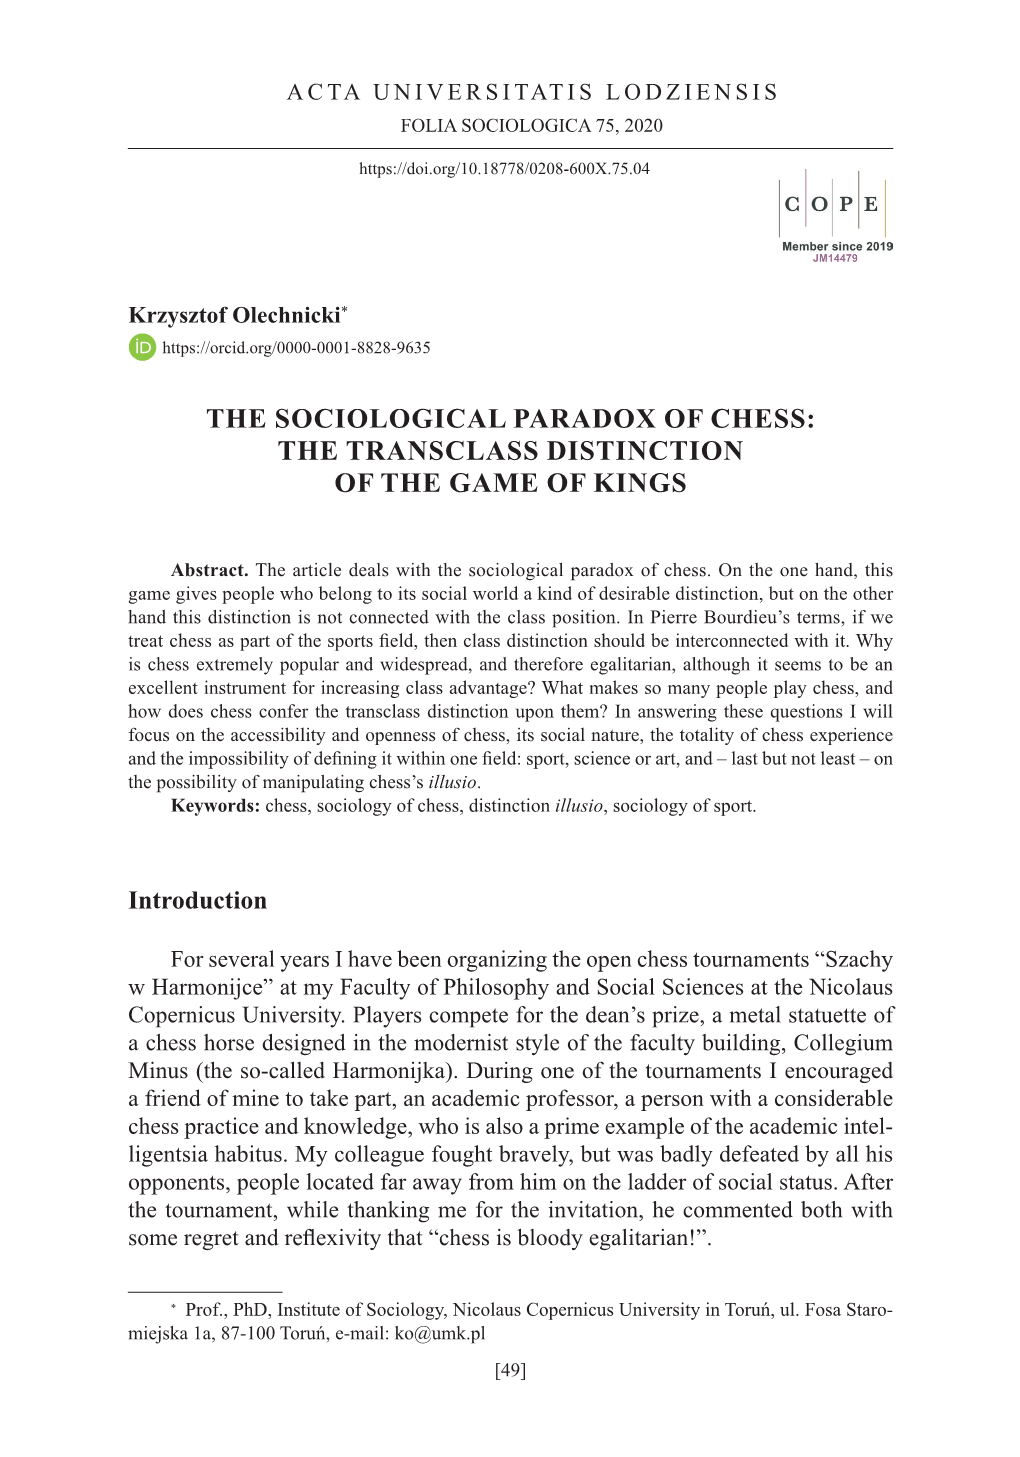 The Sociological Paradox of Chess: the Transclass Distinction of the Game of Kings